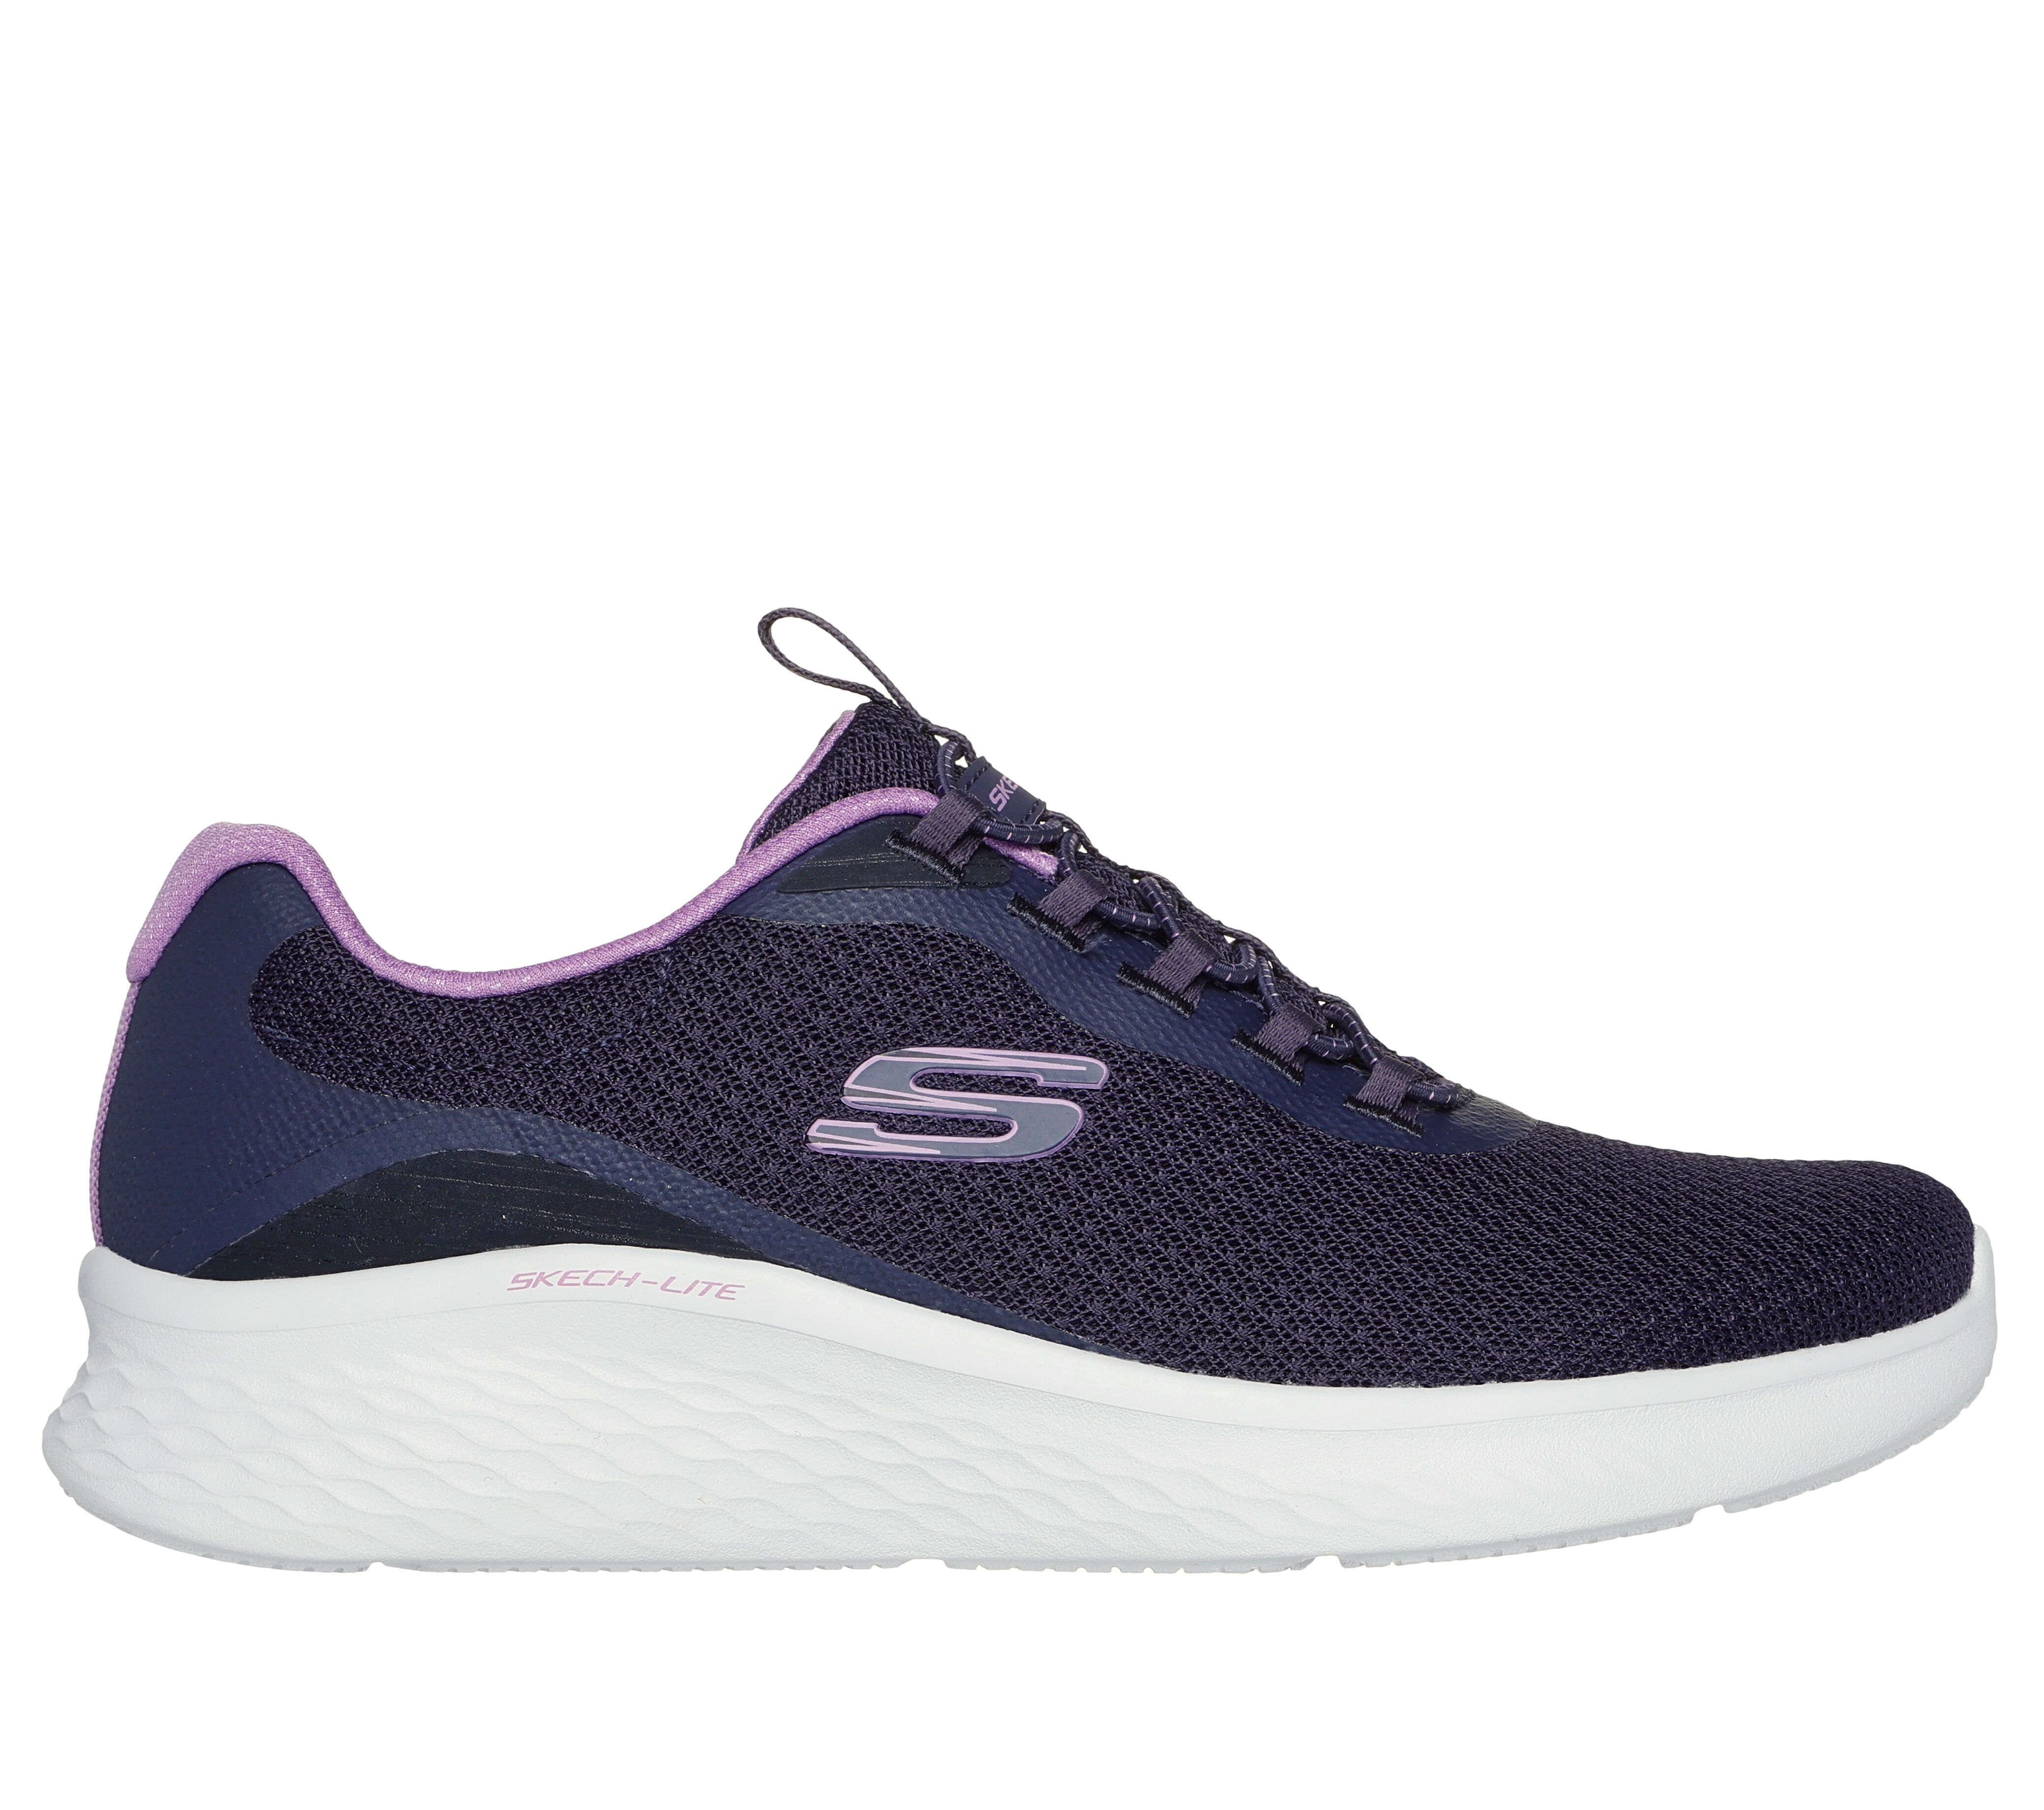 Our Planet Matters | SKECHERS